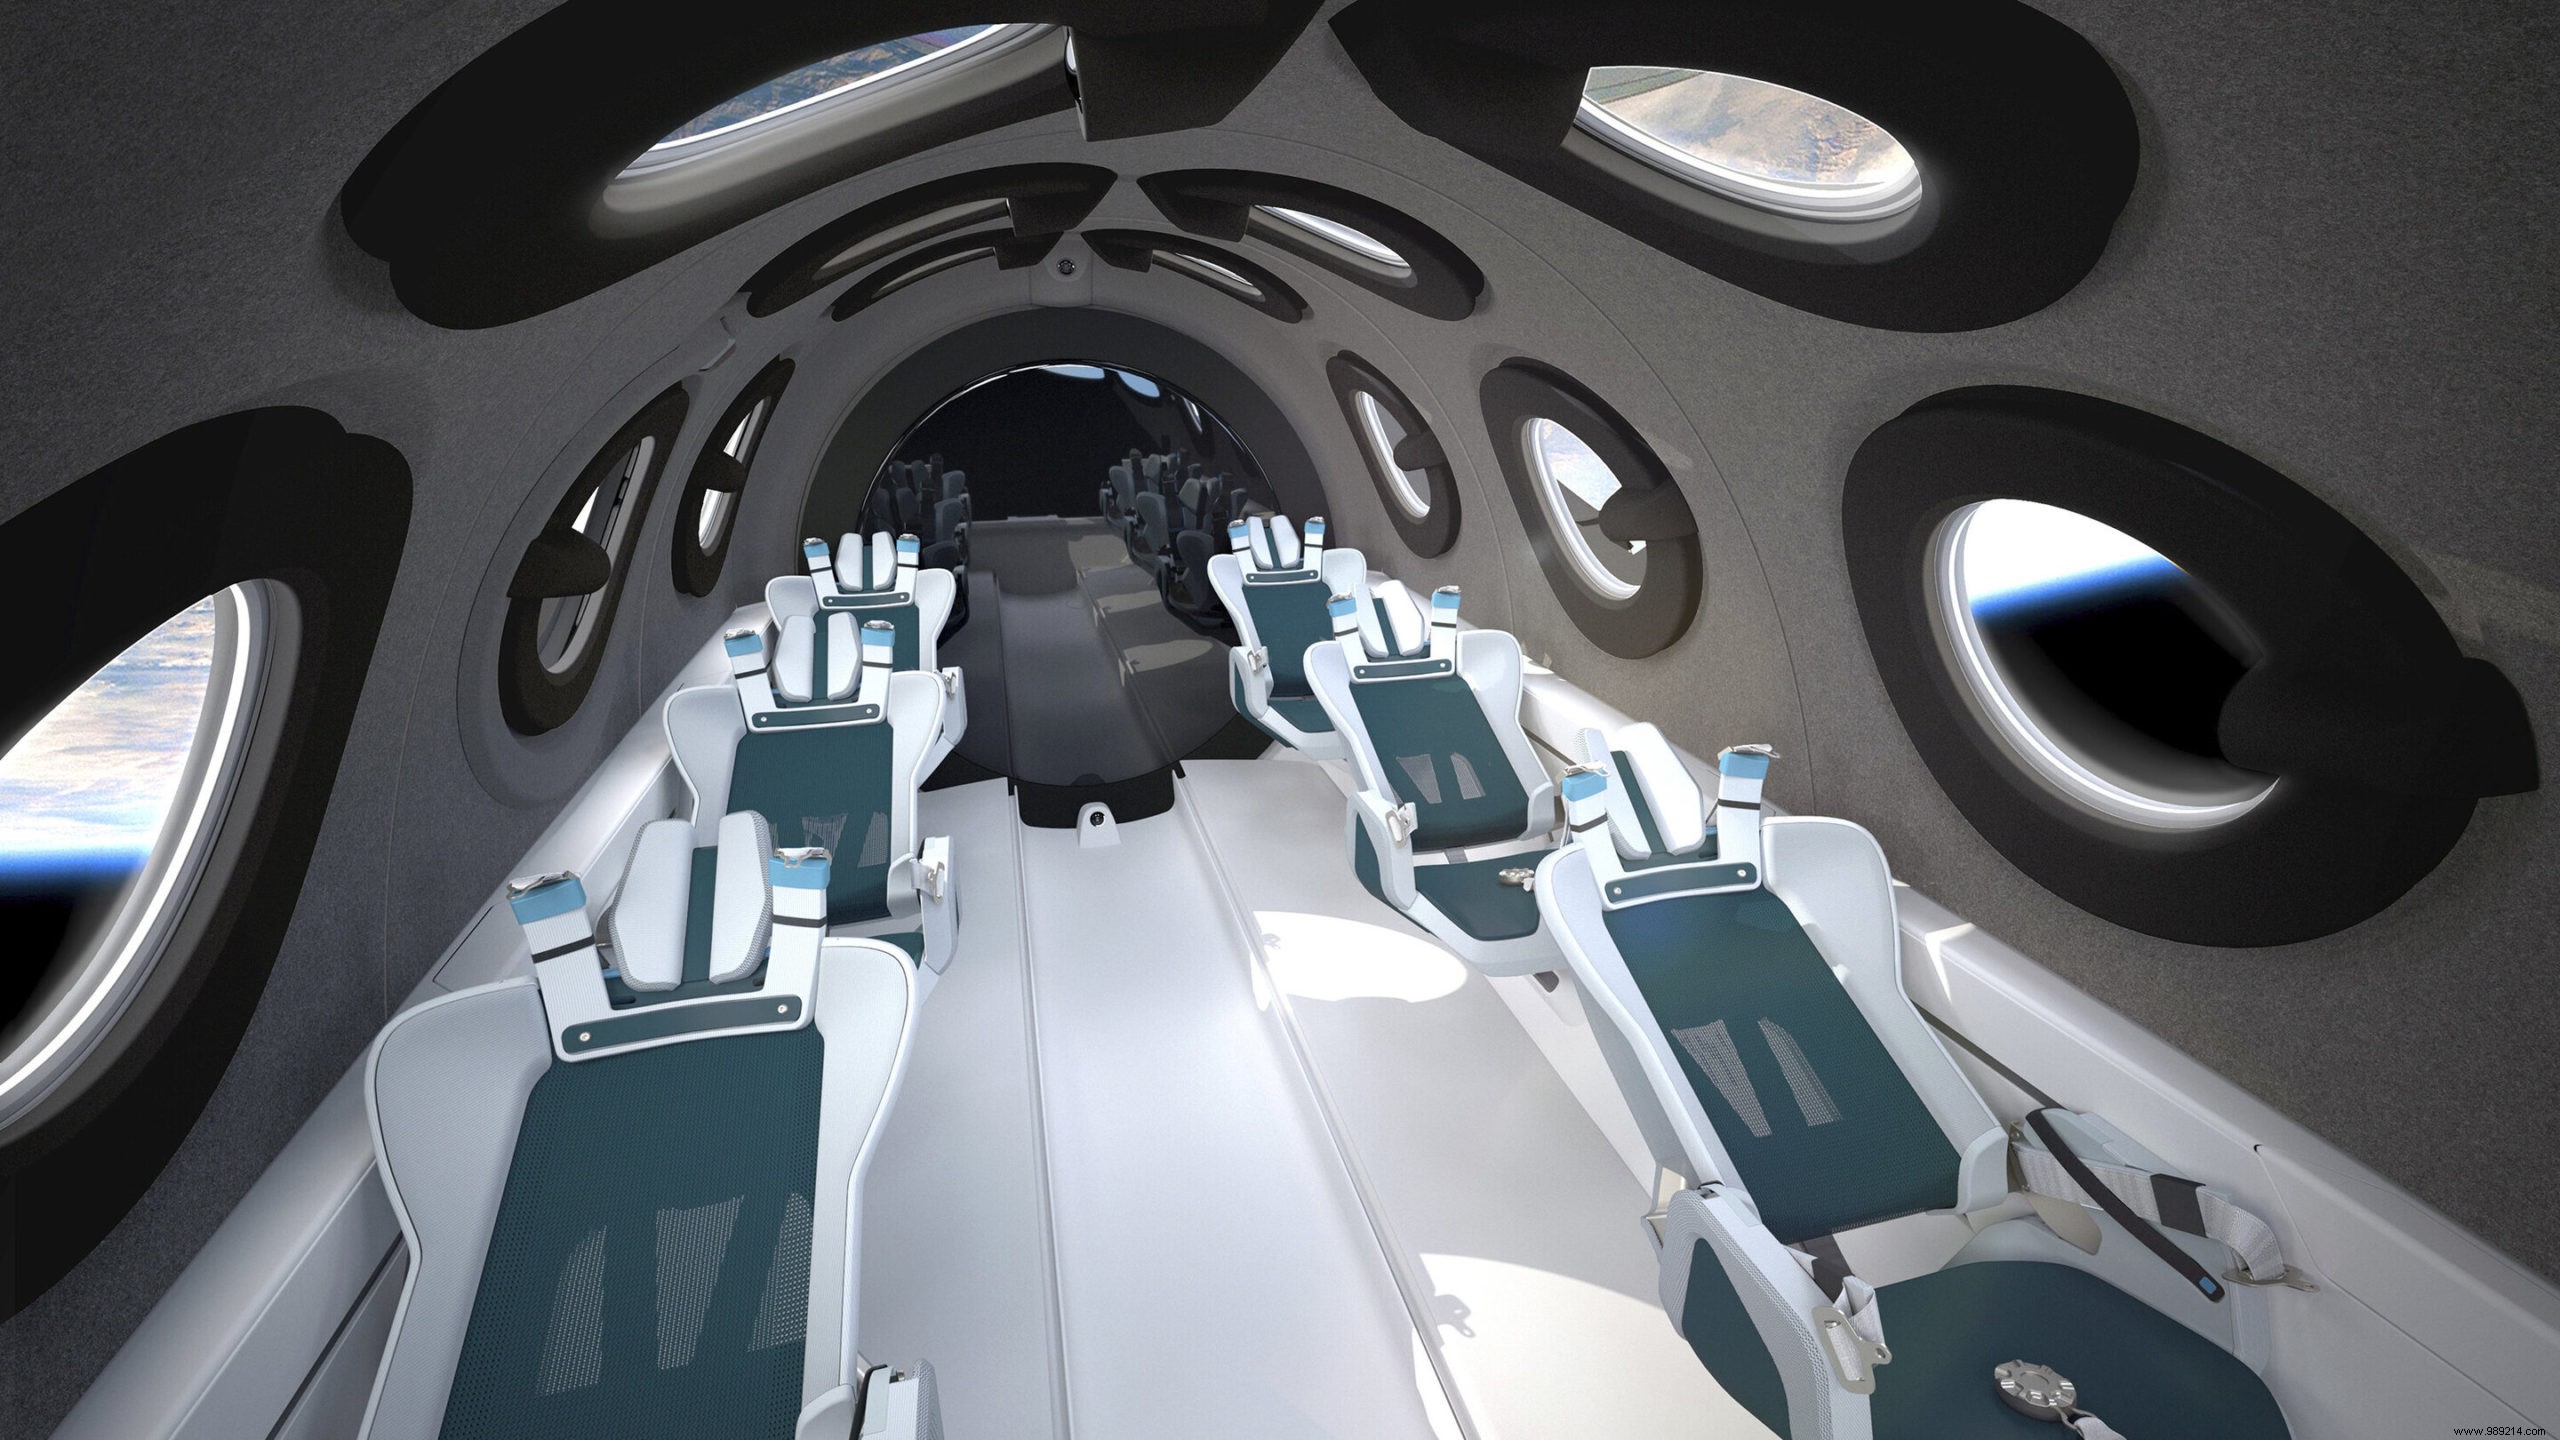 Virgin Galactic unveils the interior of its spaceship 